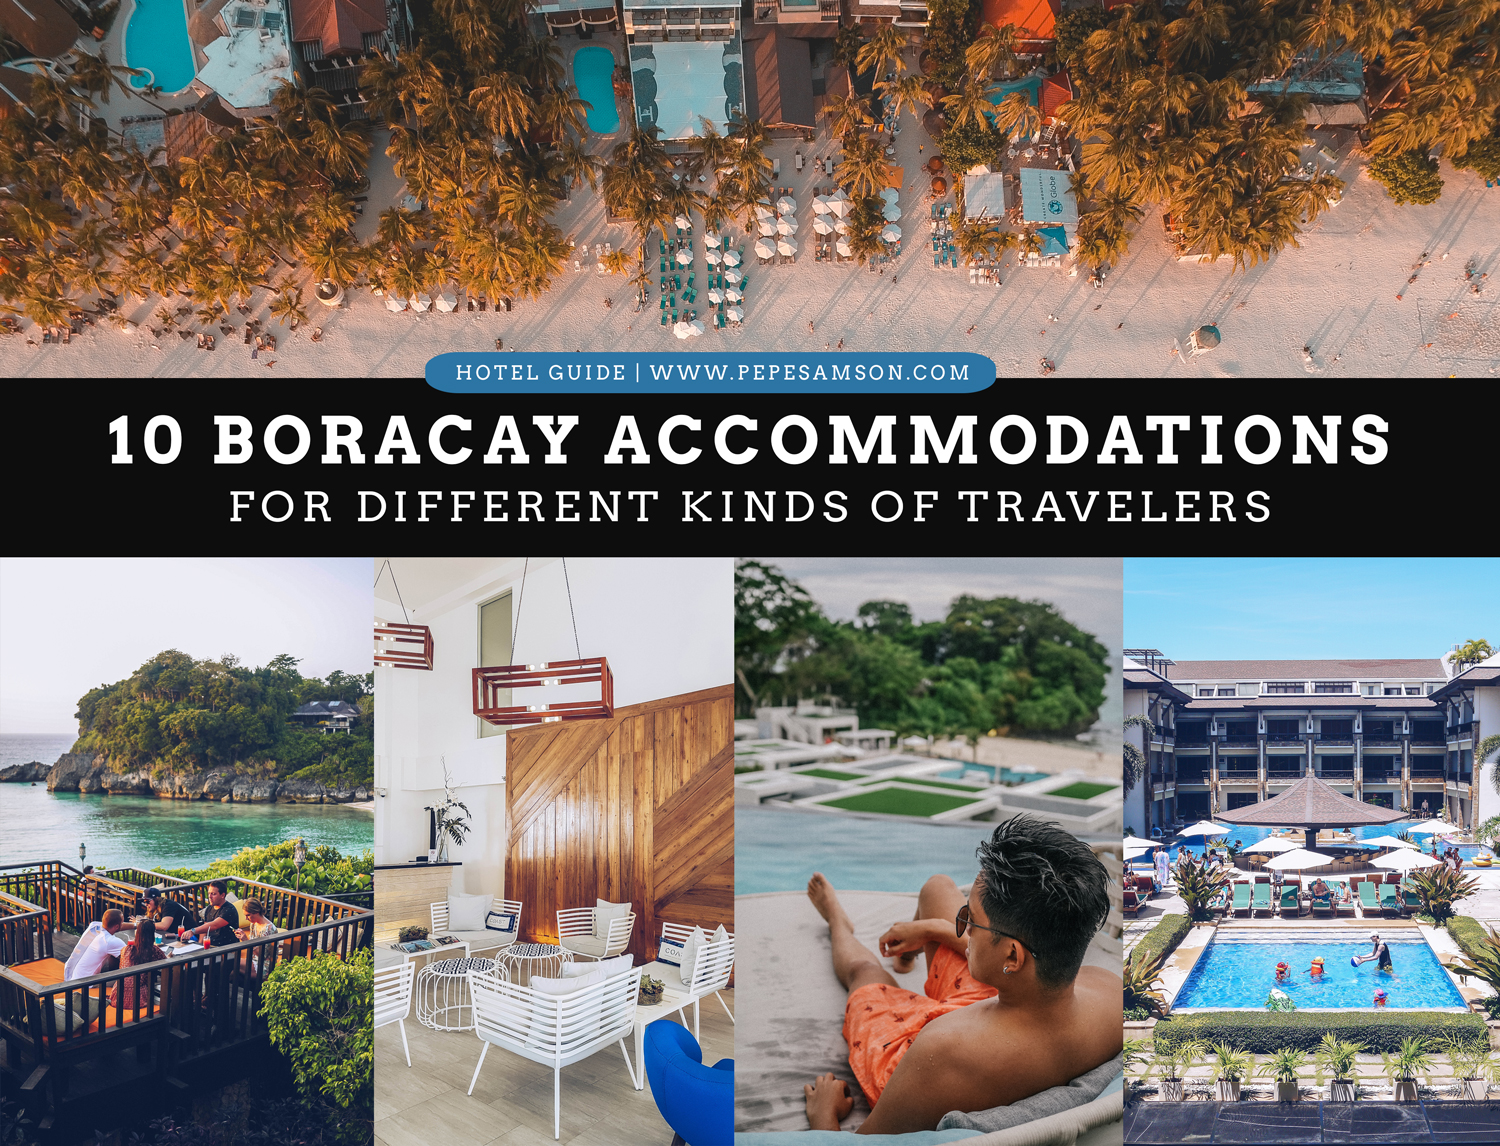 10 Boracay Accommodations for Different Kinds of Travelers